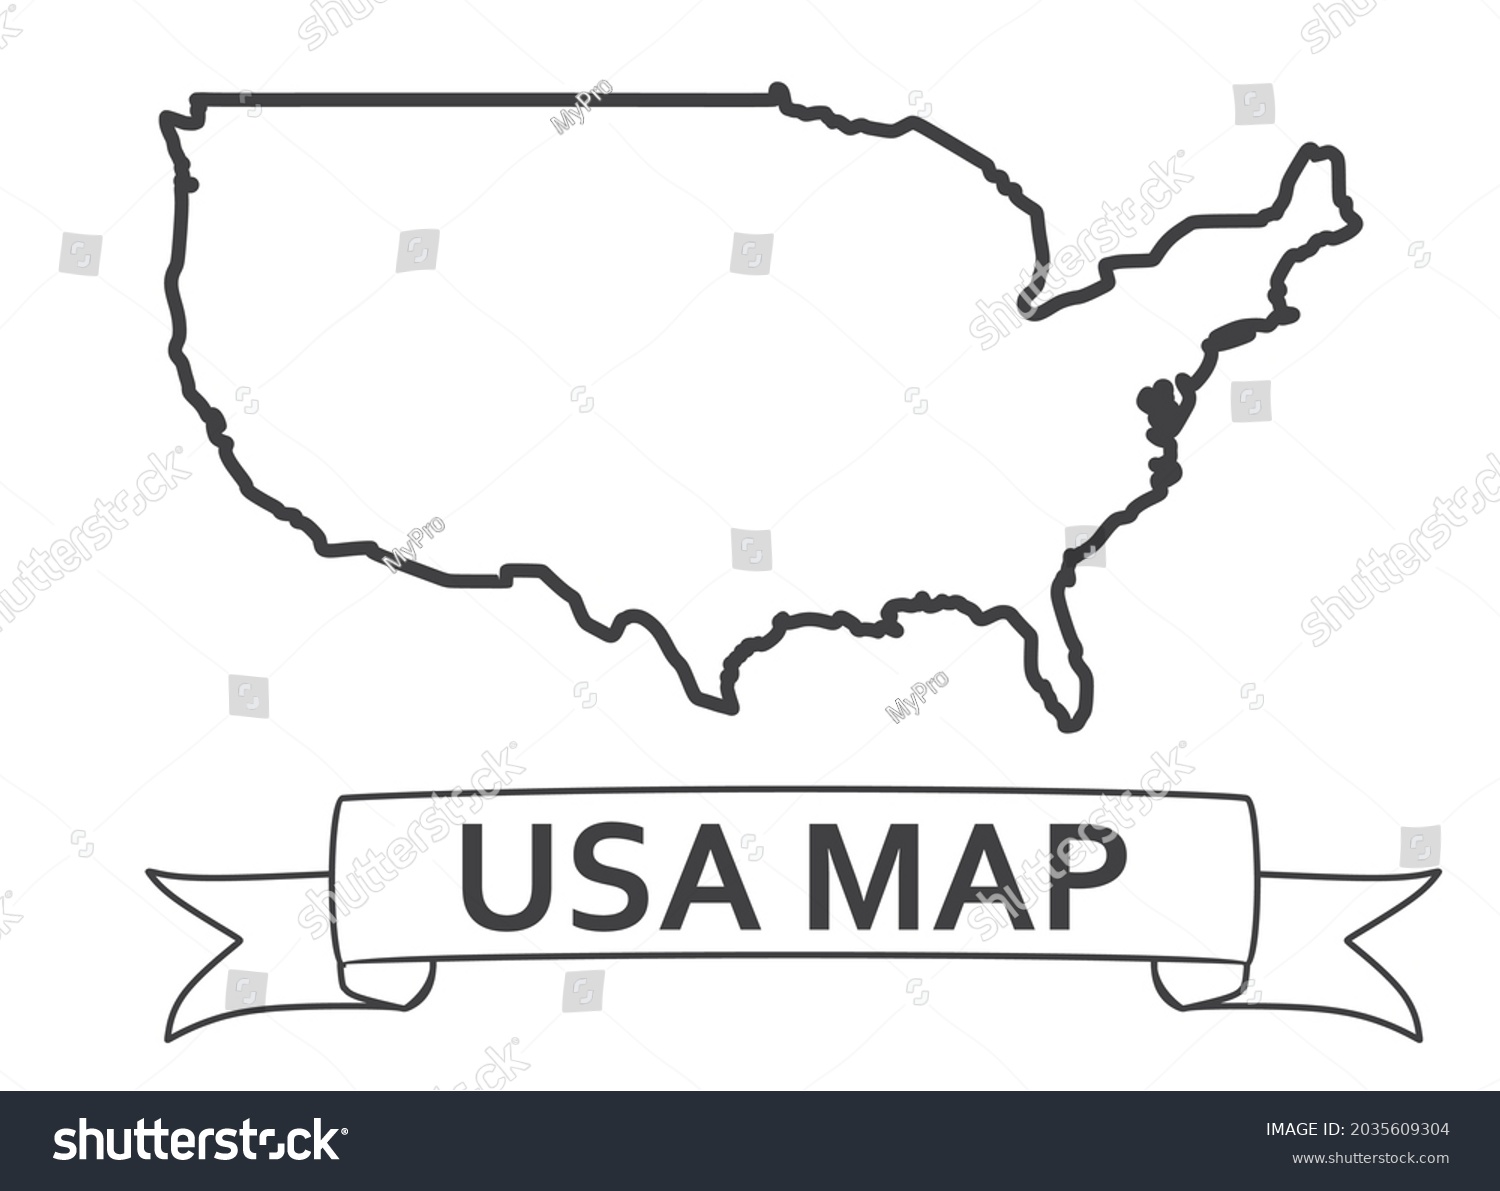 usa-map-outline-vector-illustration-stock-vector-royalty-free